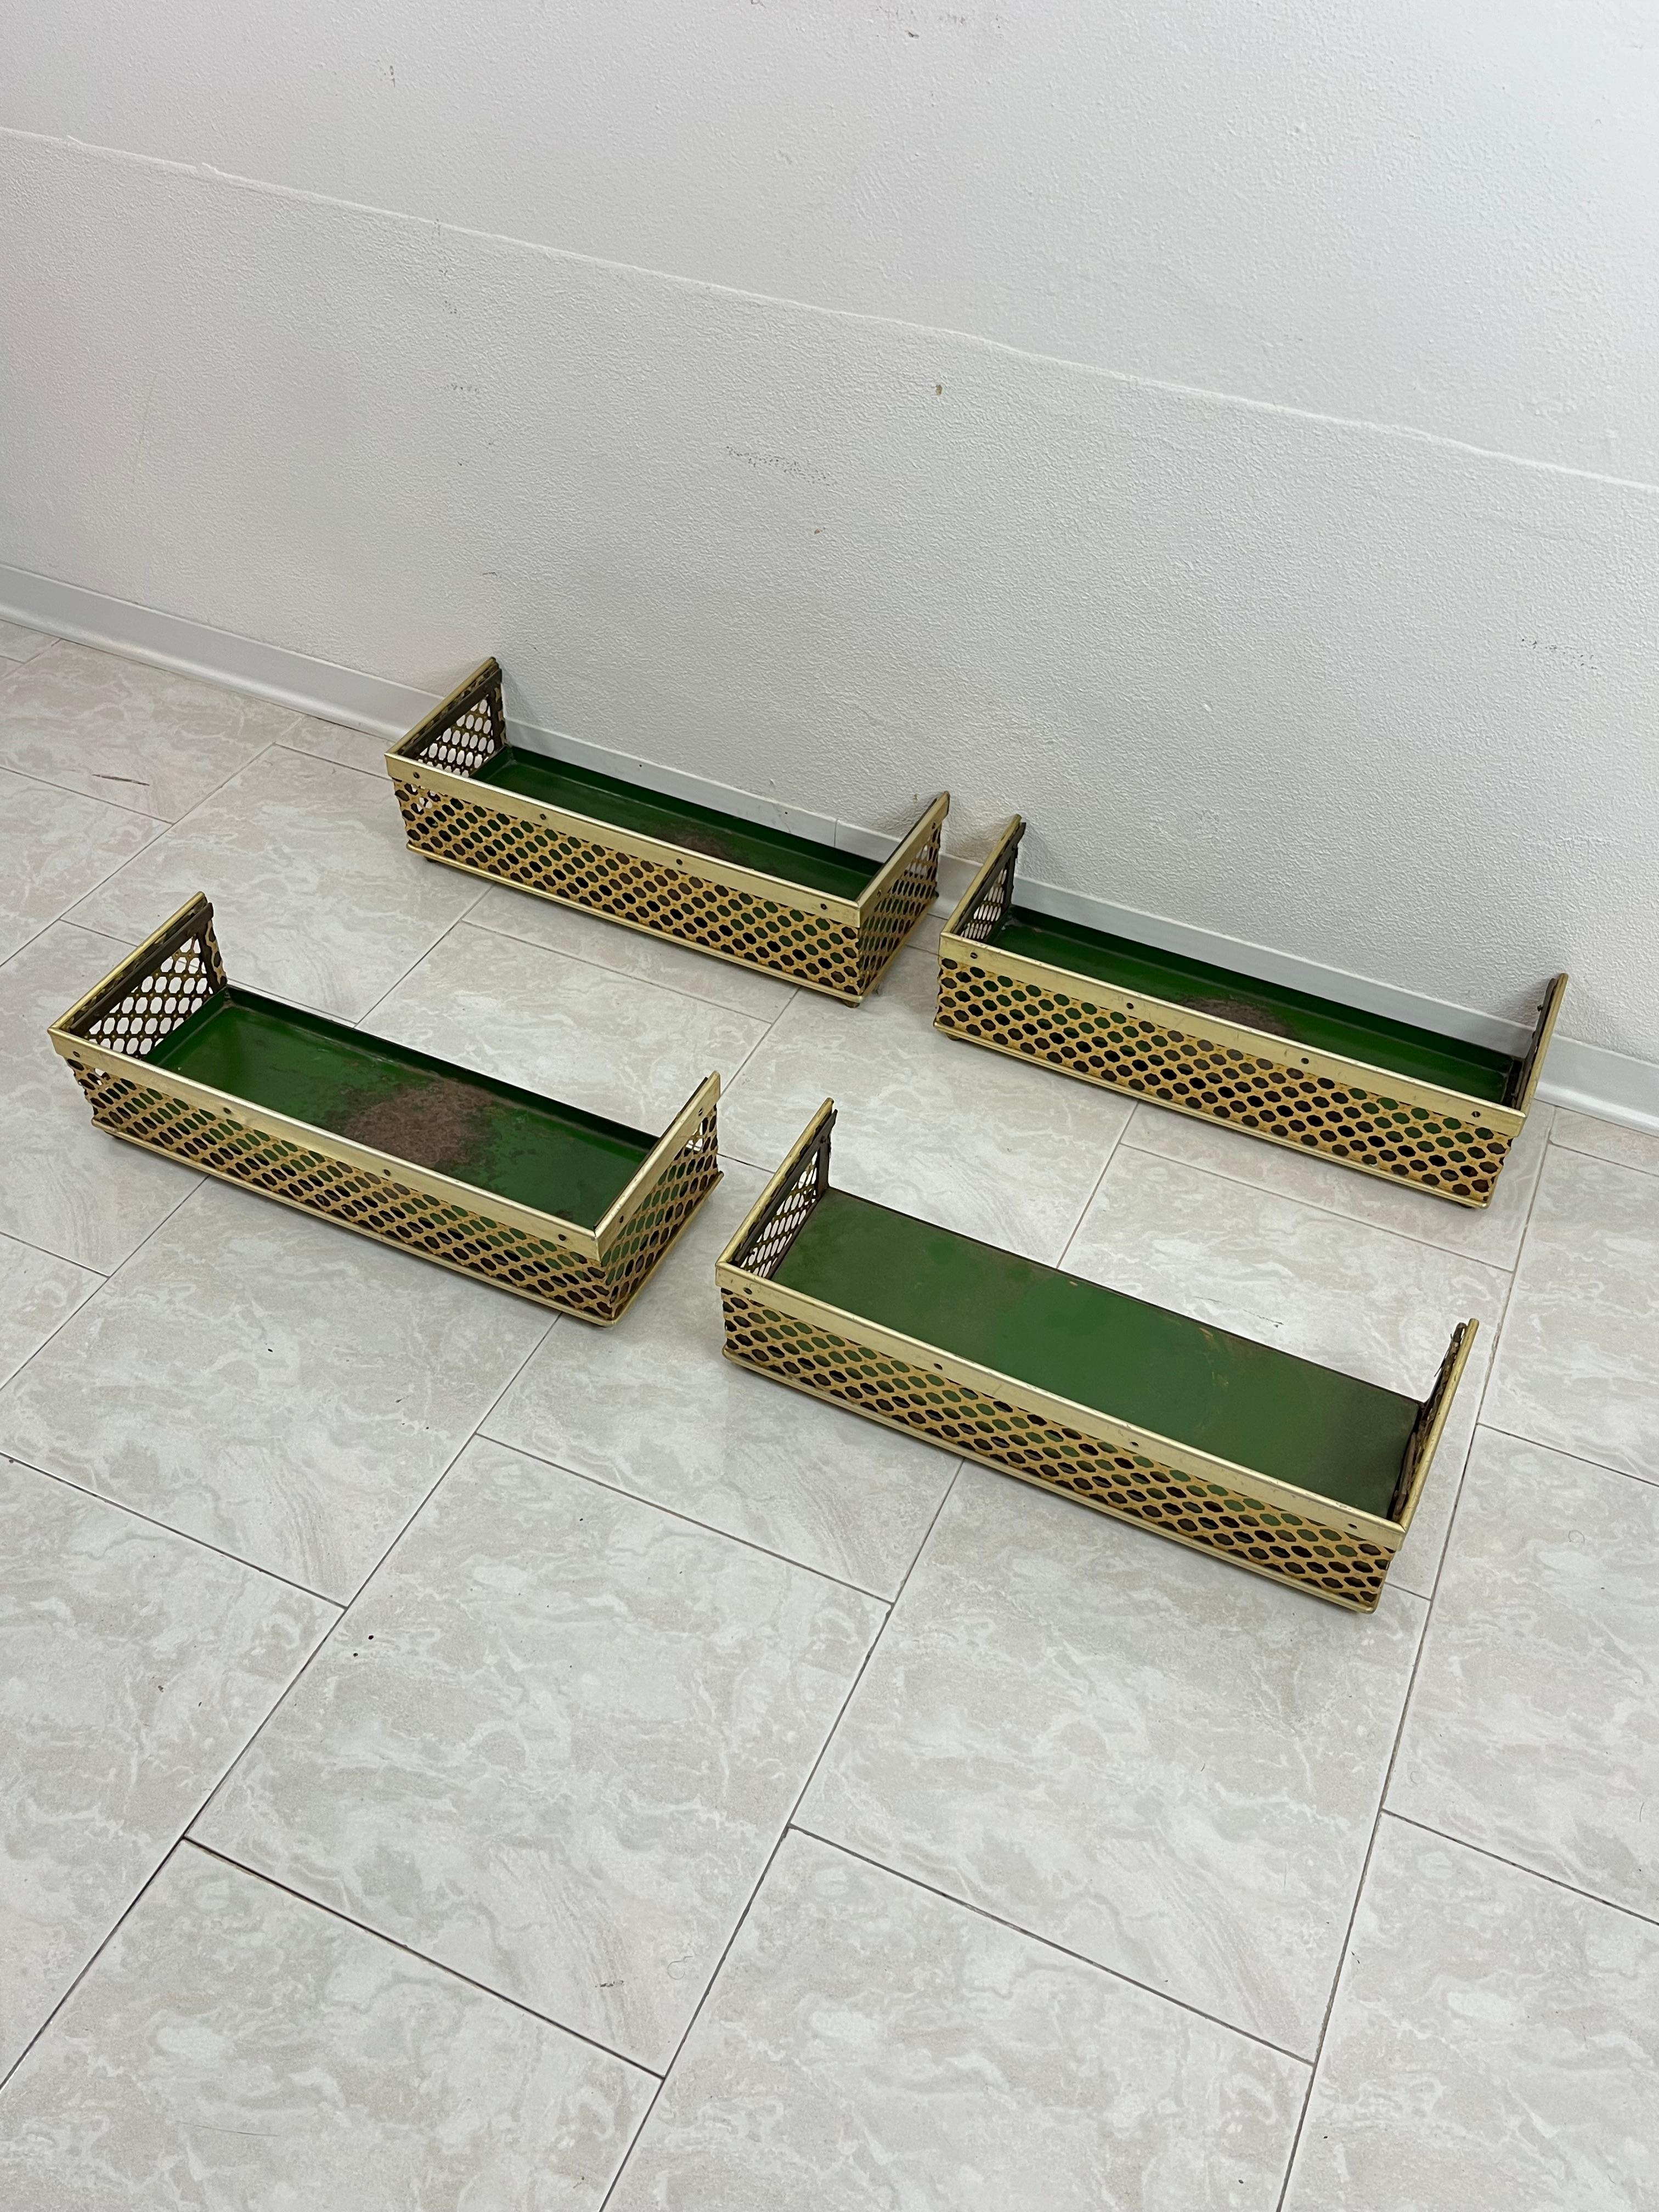 Italian Set of 4 Mid-Century Brass-Covered Planters Attributed to Gio Ponti 1950s For Sale